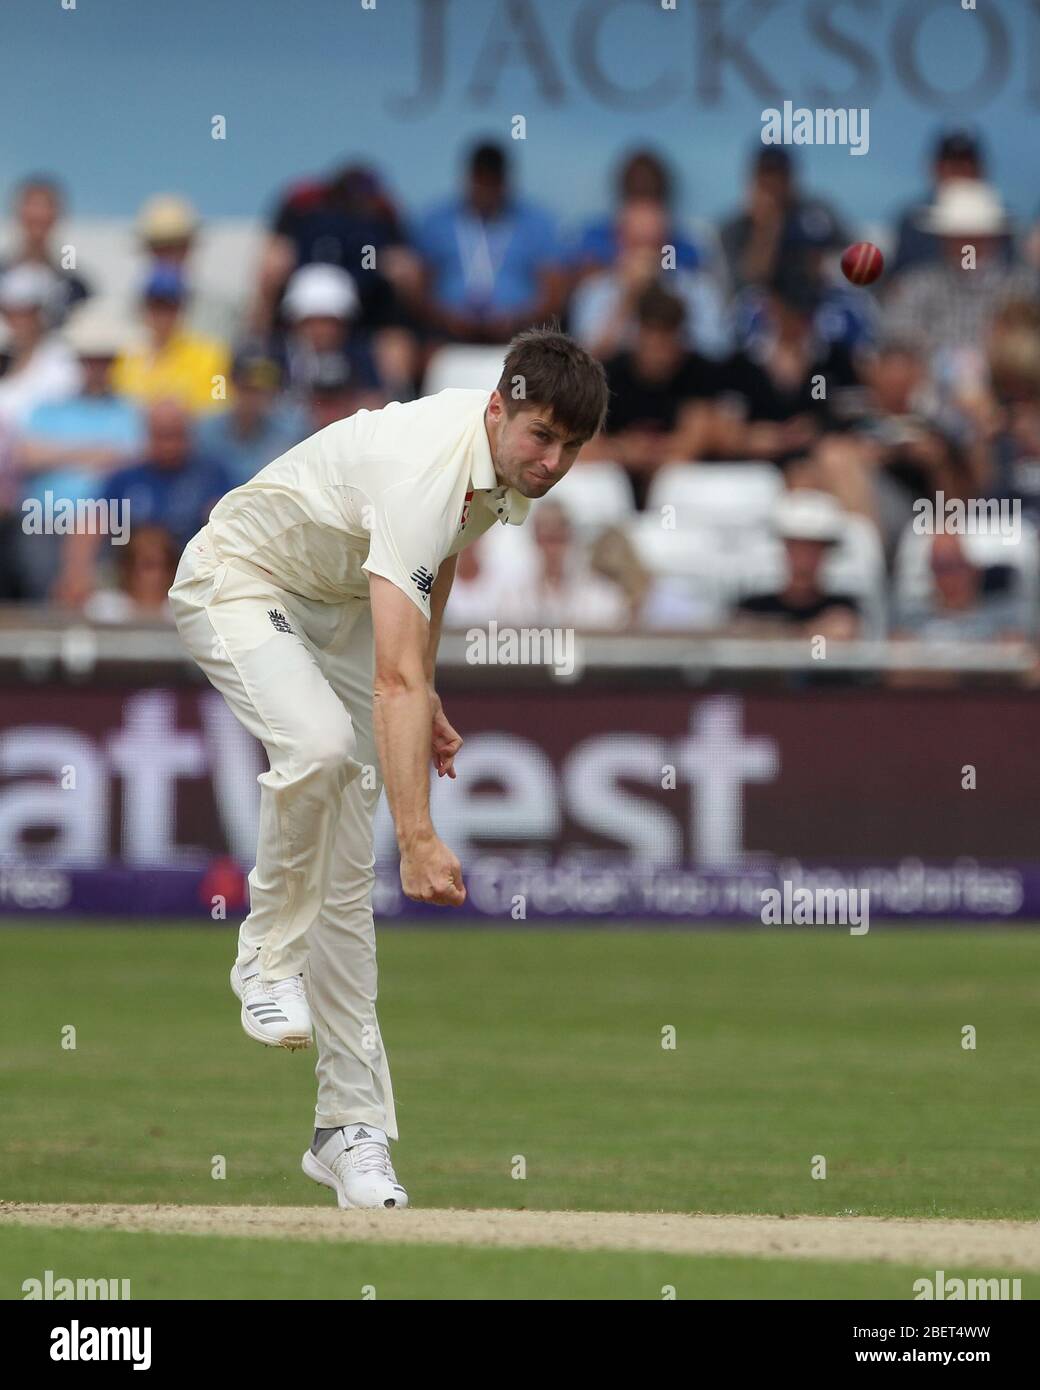 LEEDS, UK - JUNE 1ST Chris Woakes of England bowling during the first day of the Second Nat West Test match between England and Pakistan at Headingley Cricket Ground, Leeds on Friday 1st June 2018. (Credit: Mark Fletcher | MI News) Stock Photo